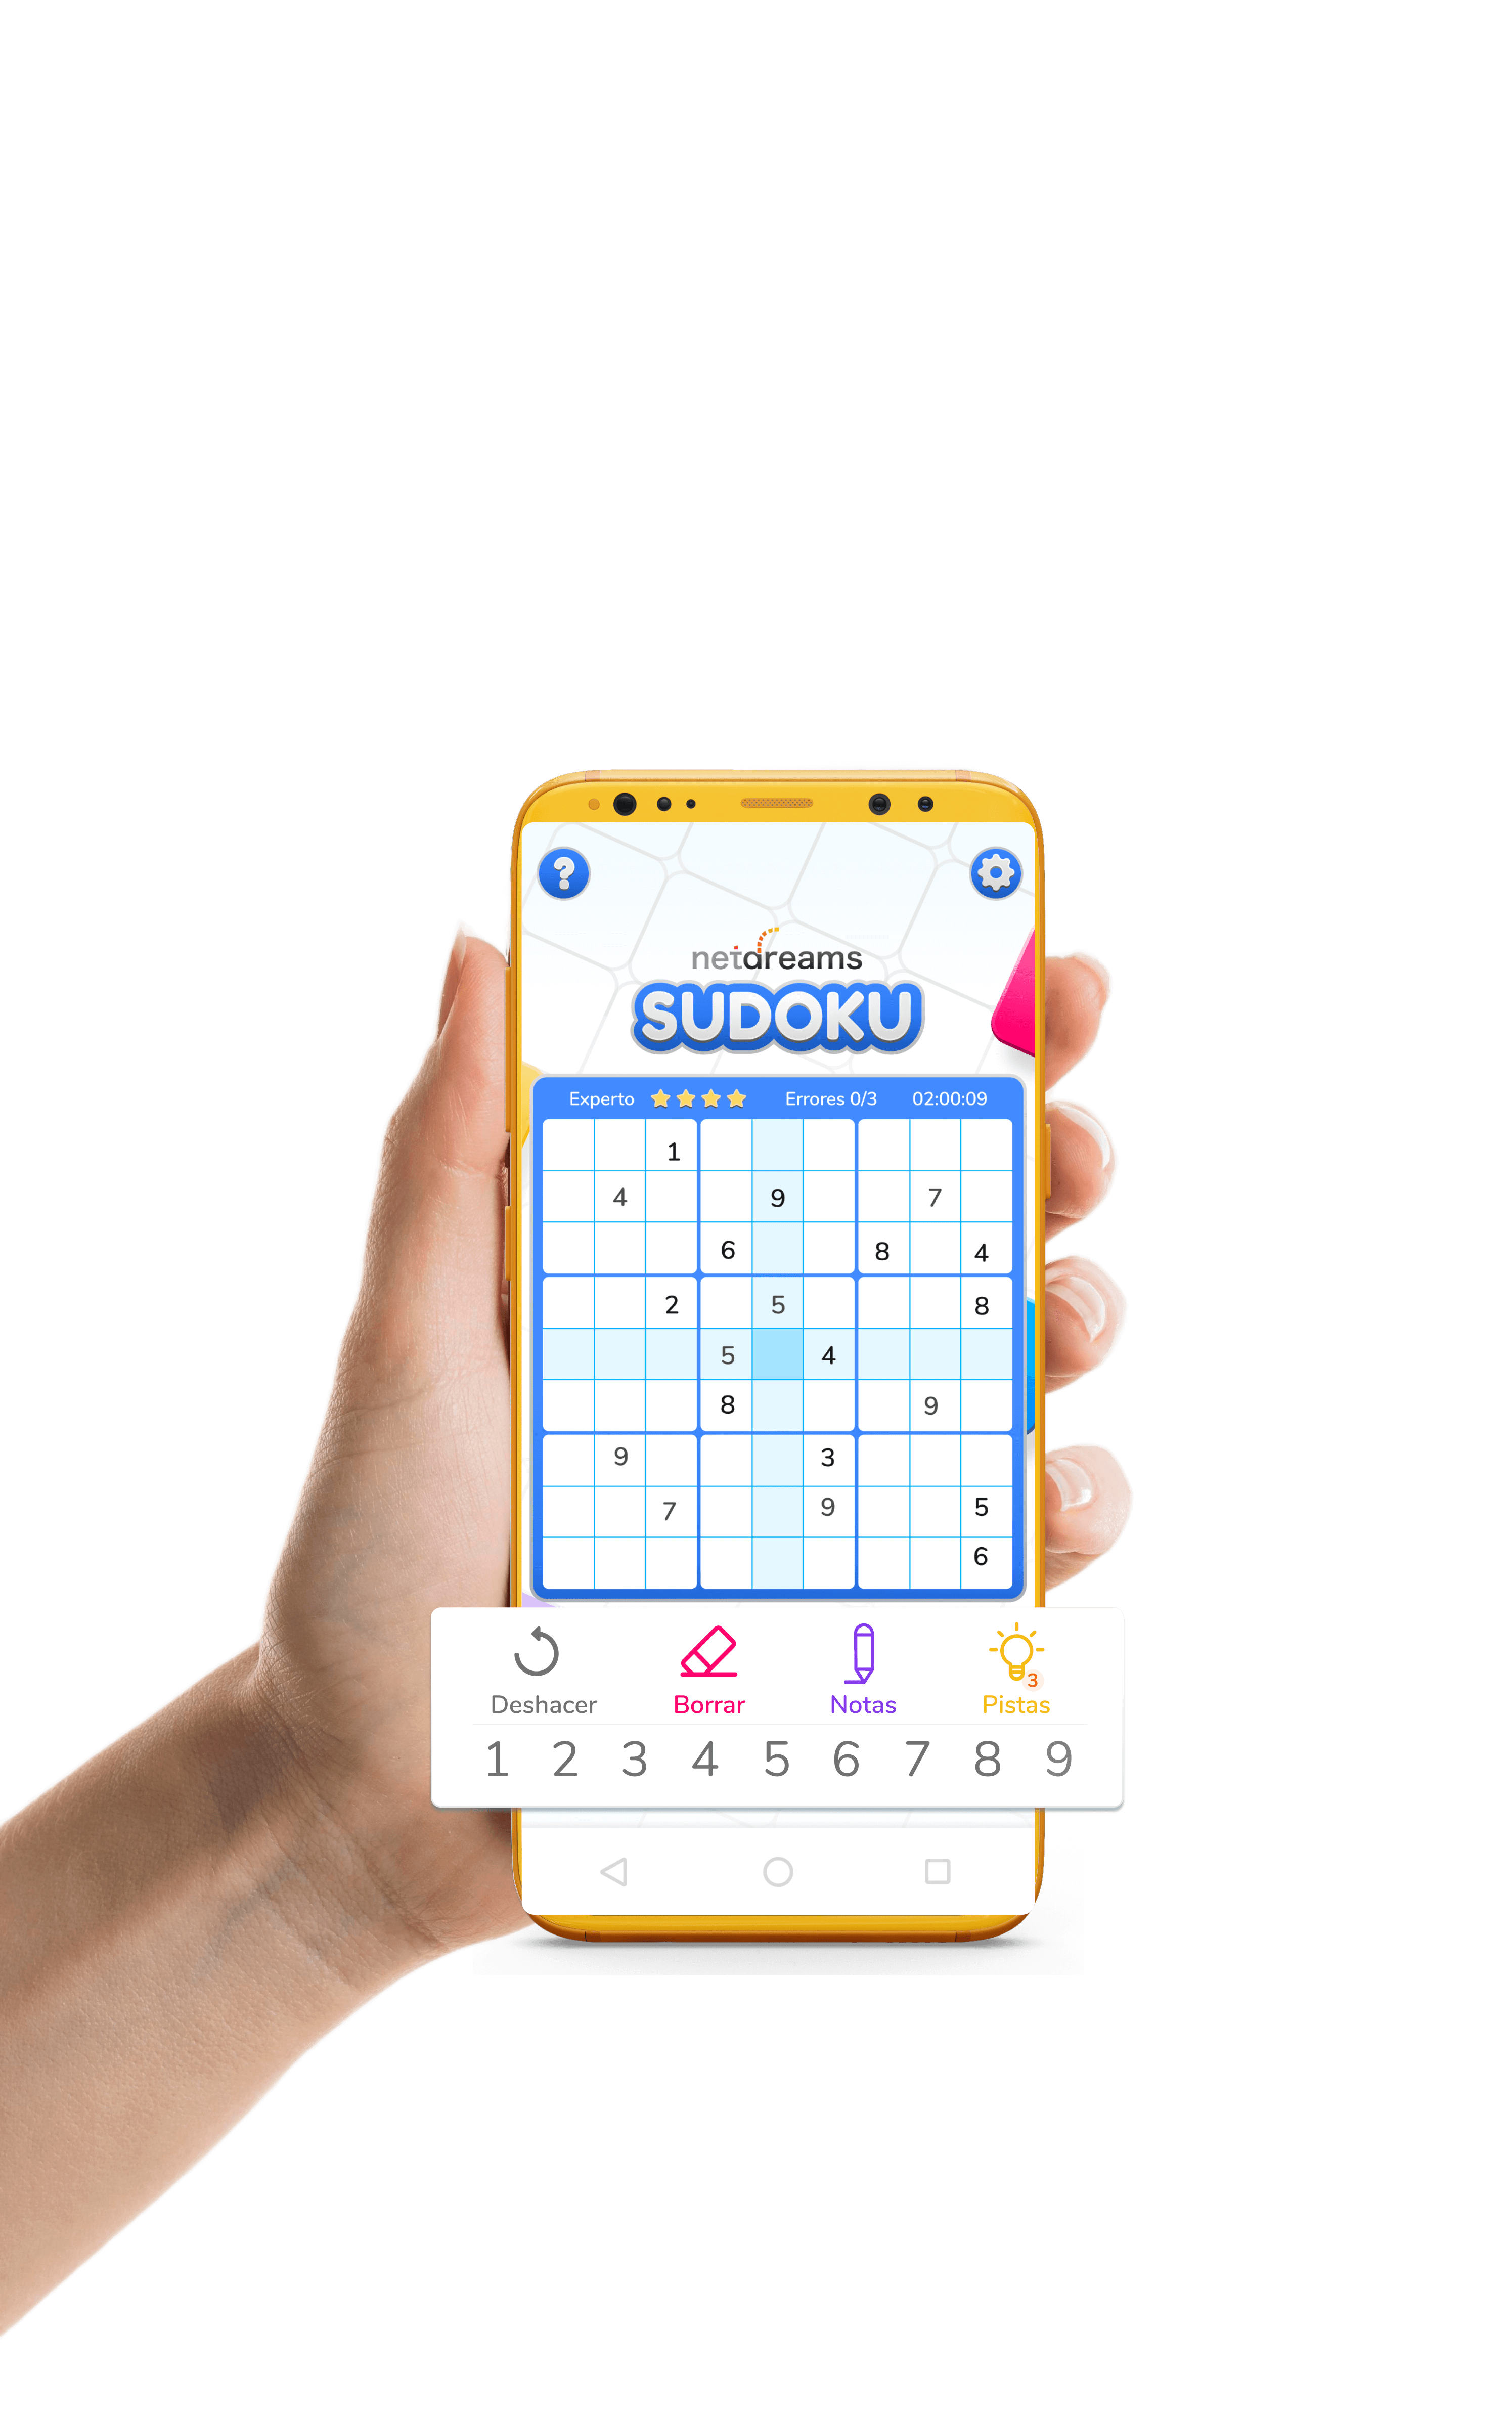 Sudoku Netdreams game on your cell phone